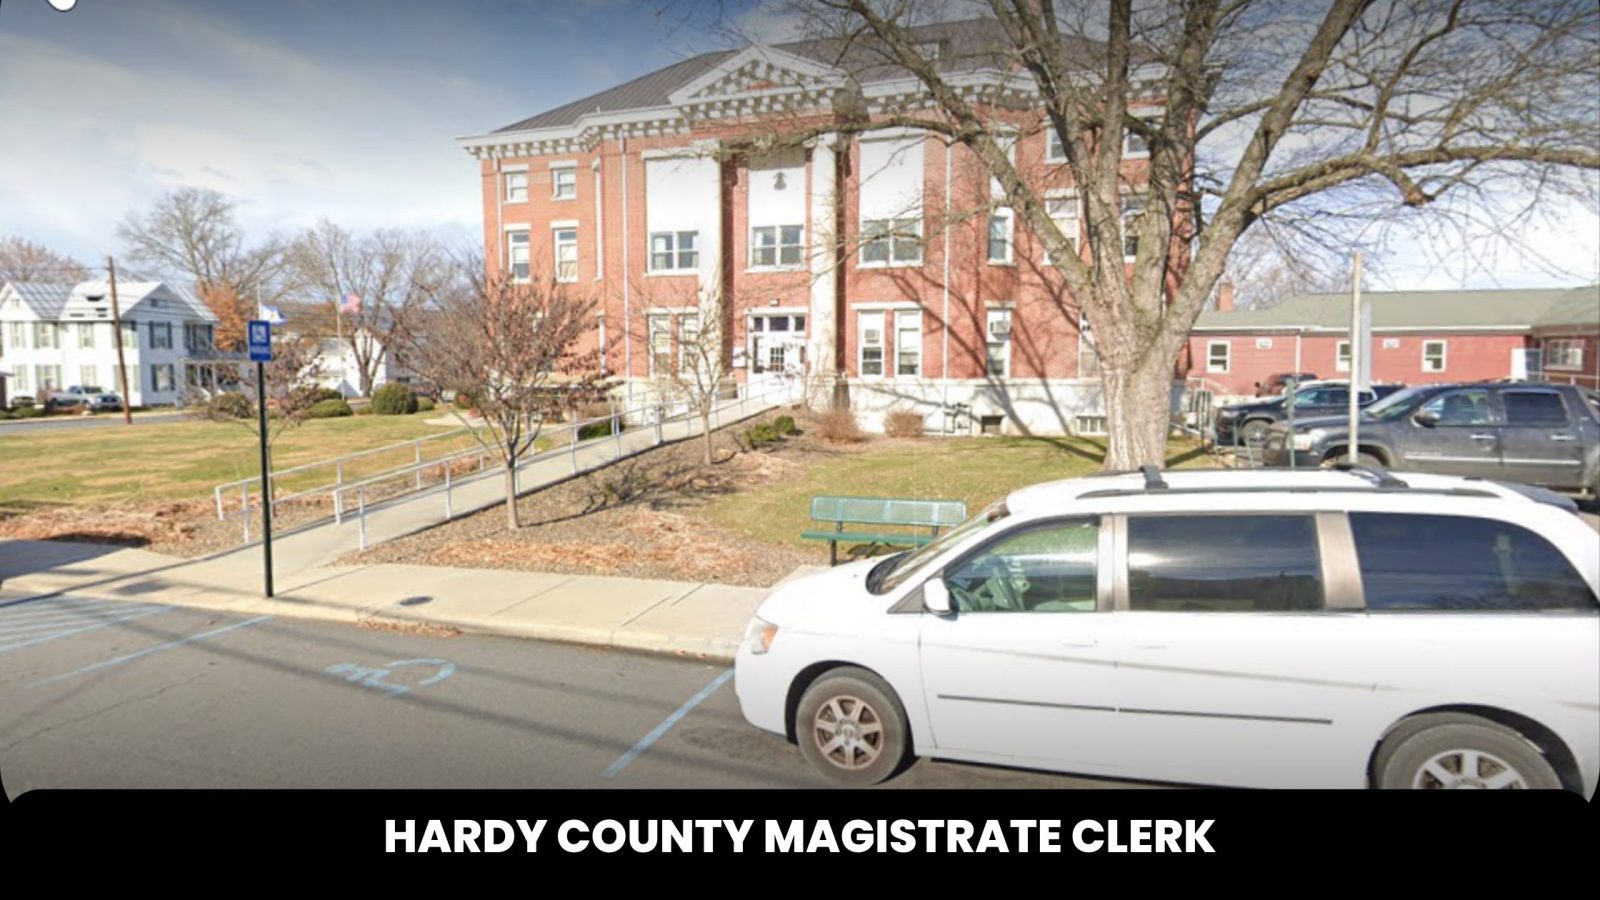 Hardy County Magistrate Clerk